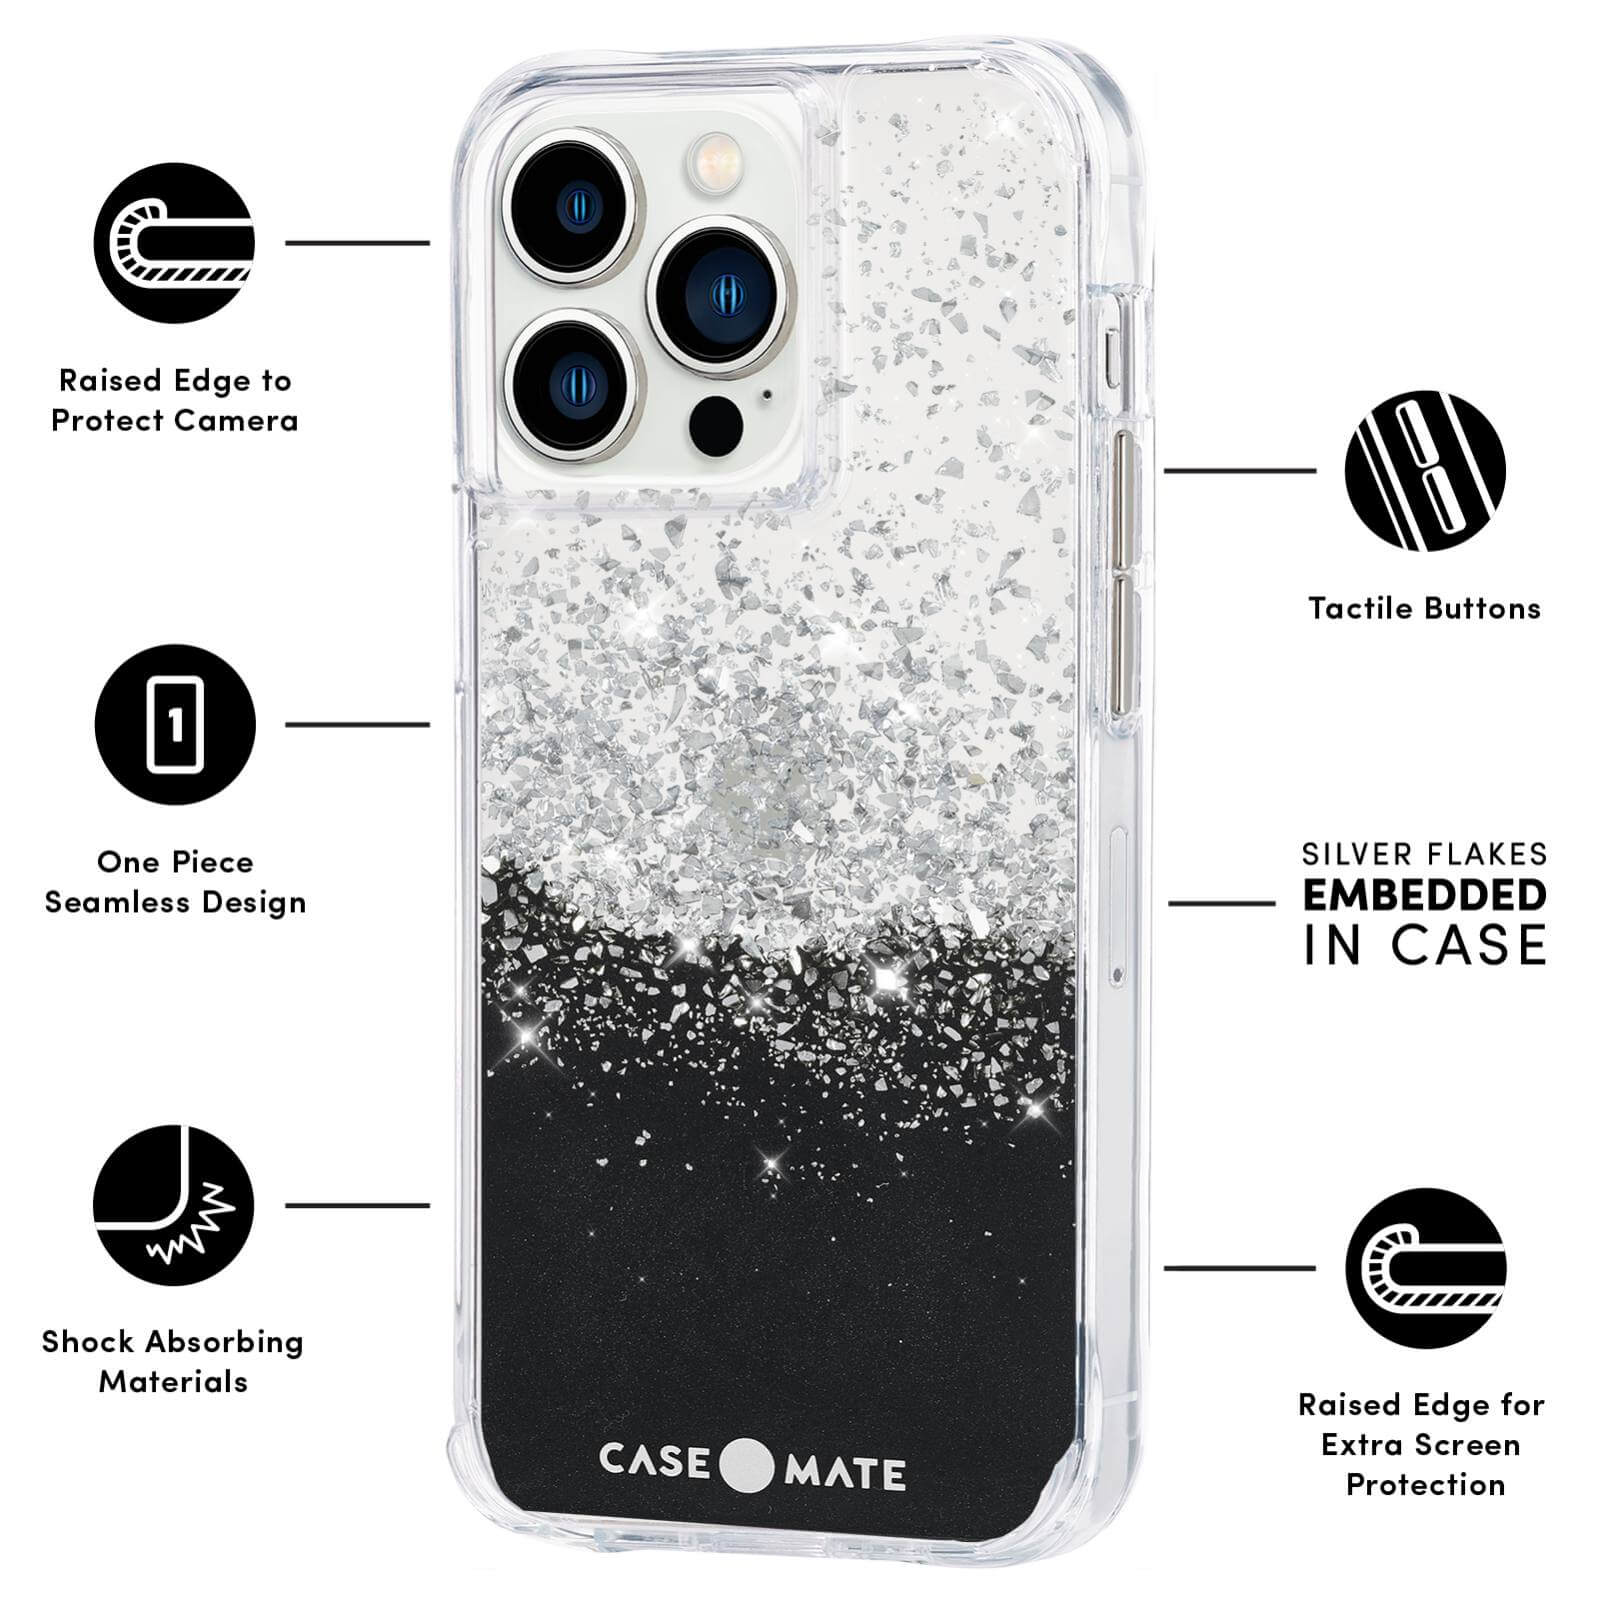 FEATURES: RAISED EDGE TO PROTECT CAMERA, ONE PIECE SEAMLESS DESIGN, SHOCK ABSORBING MATERIALS, TACTILE BUTTONS, SILVER FLAKES EMBEDDED IN CASE, RAISED EDGE FOR EXTRA SCREEN PROTECTION. COLOR::KARAT ONYX